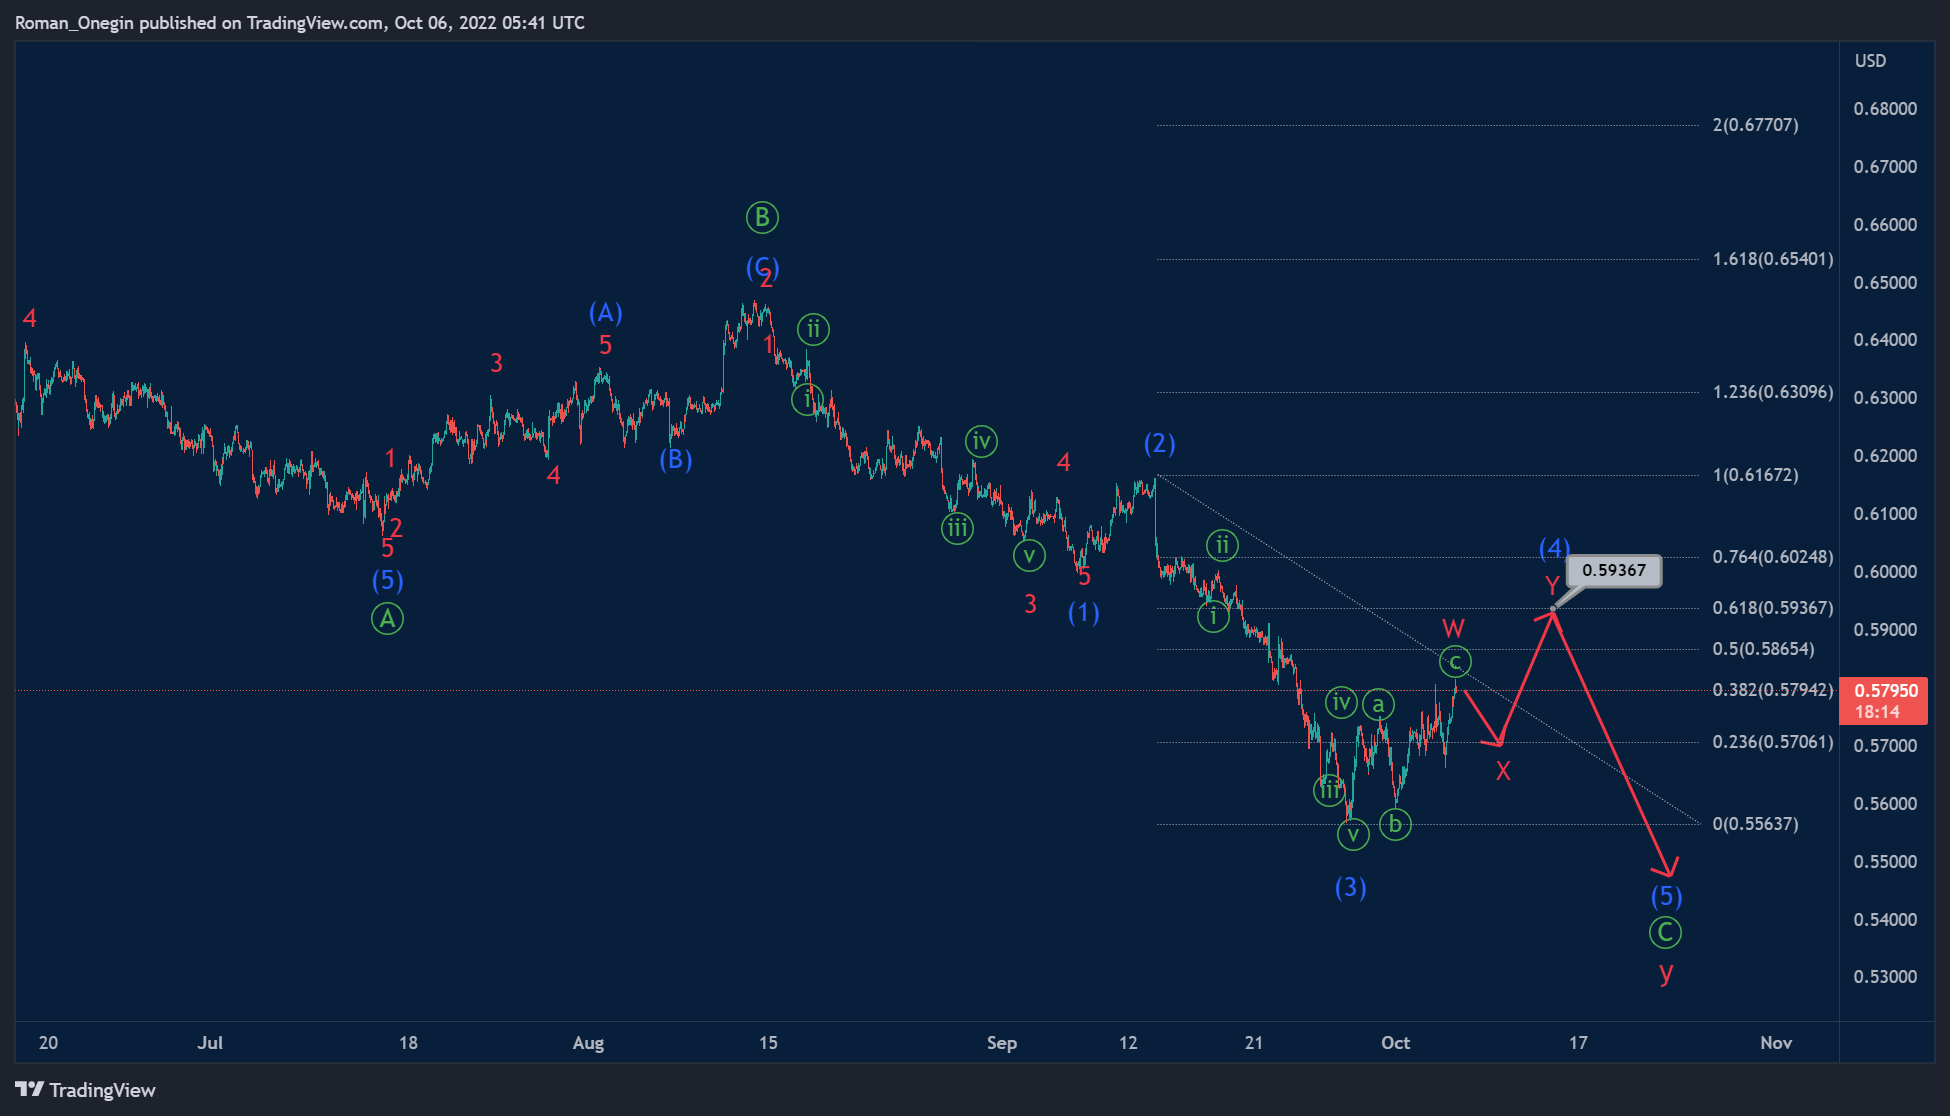 On the 1H timeframe, NZDUSD seems to be forming a bearish trend, which may take the form of a double zigzag w-x-y of the cycle degree. The current chart shows the structure of the final wave y, which assumes a primary zigzag Ⓐ-Ⓑ-Ⓒ - 1